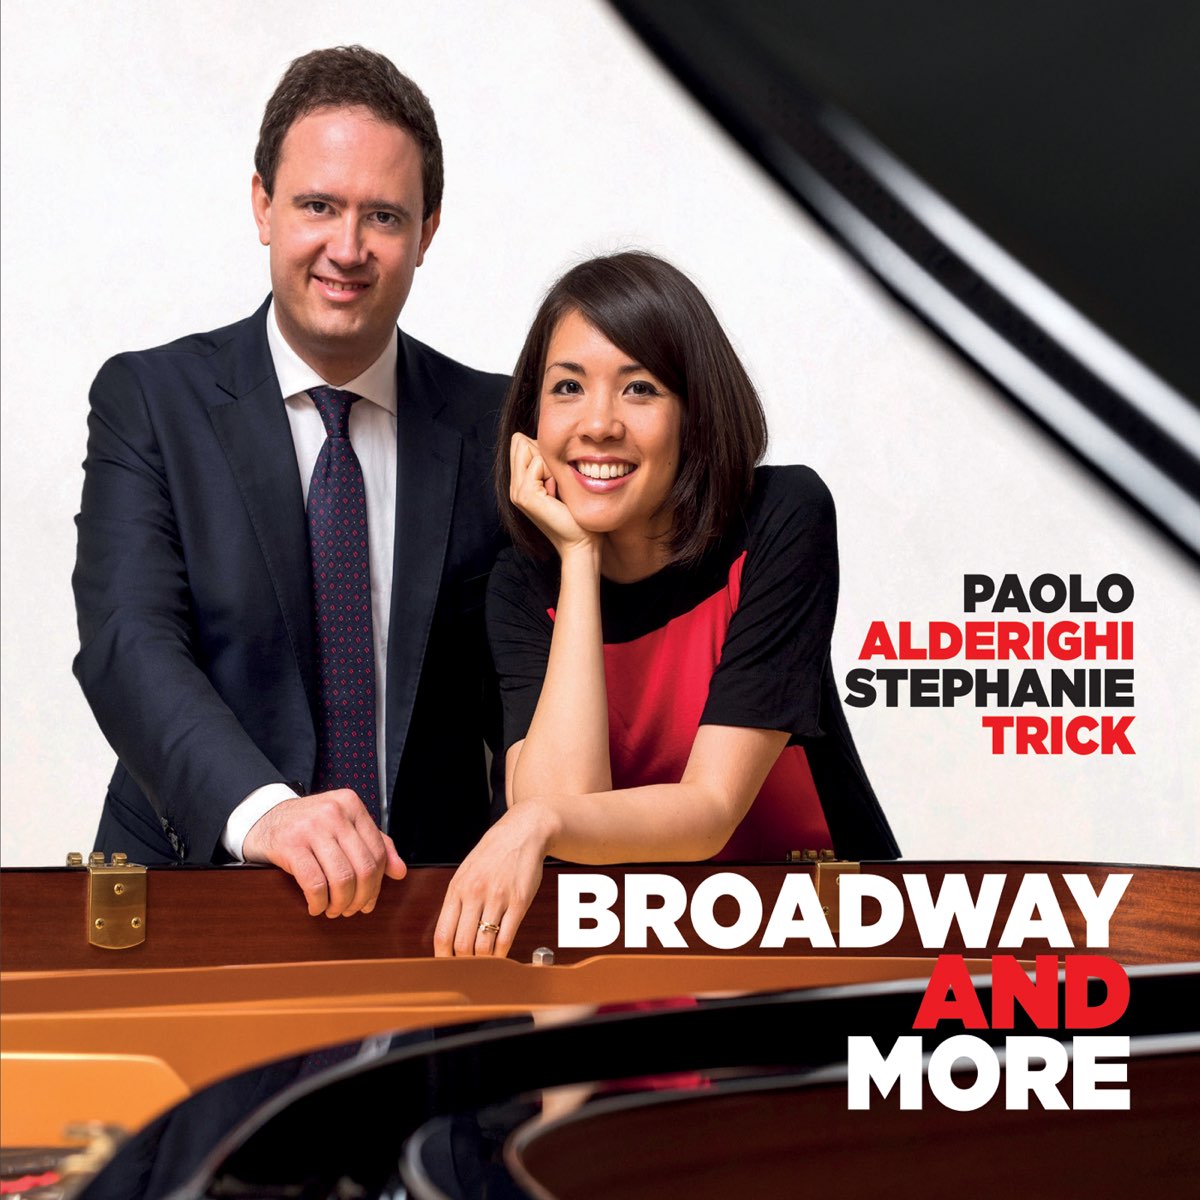 Broadway and More di Paolo Alderighi & Stephanie Trick.